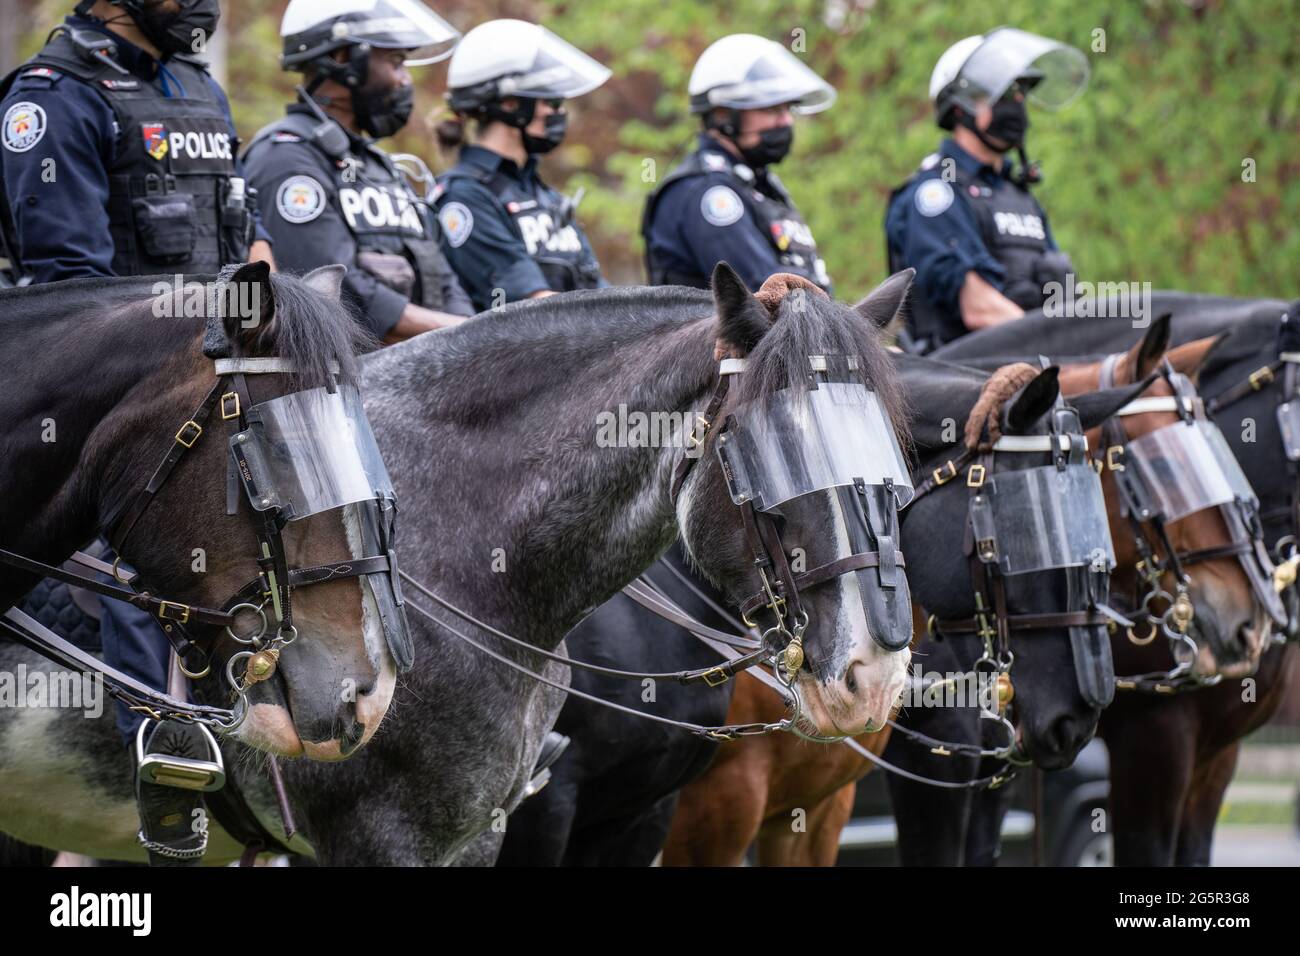 Mounted police officers monitor an anti-lockdown protest at Queen's Park in Toronto, Ontario. Stock Photo